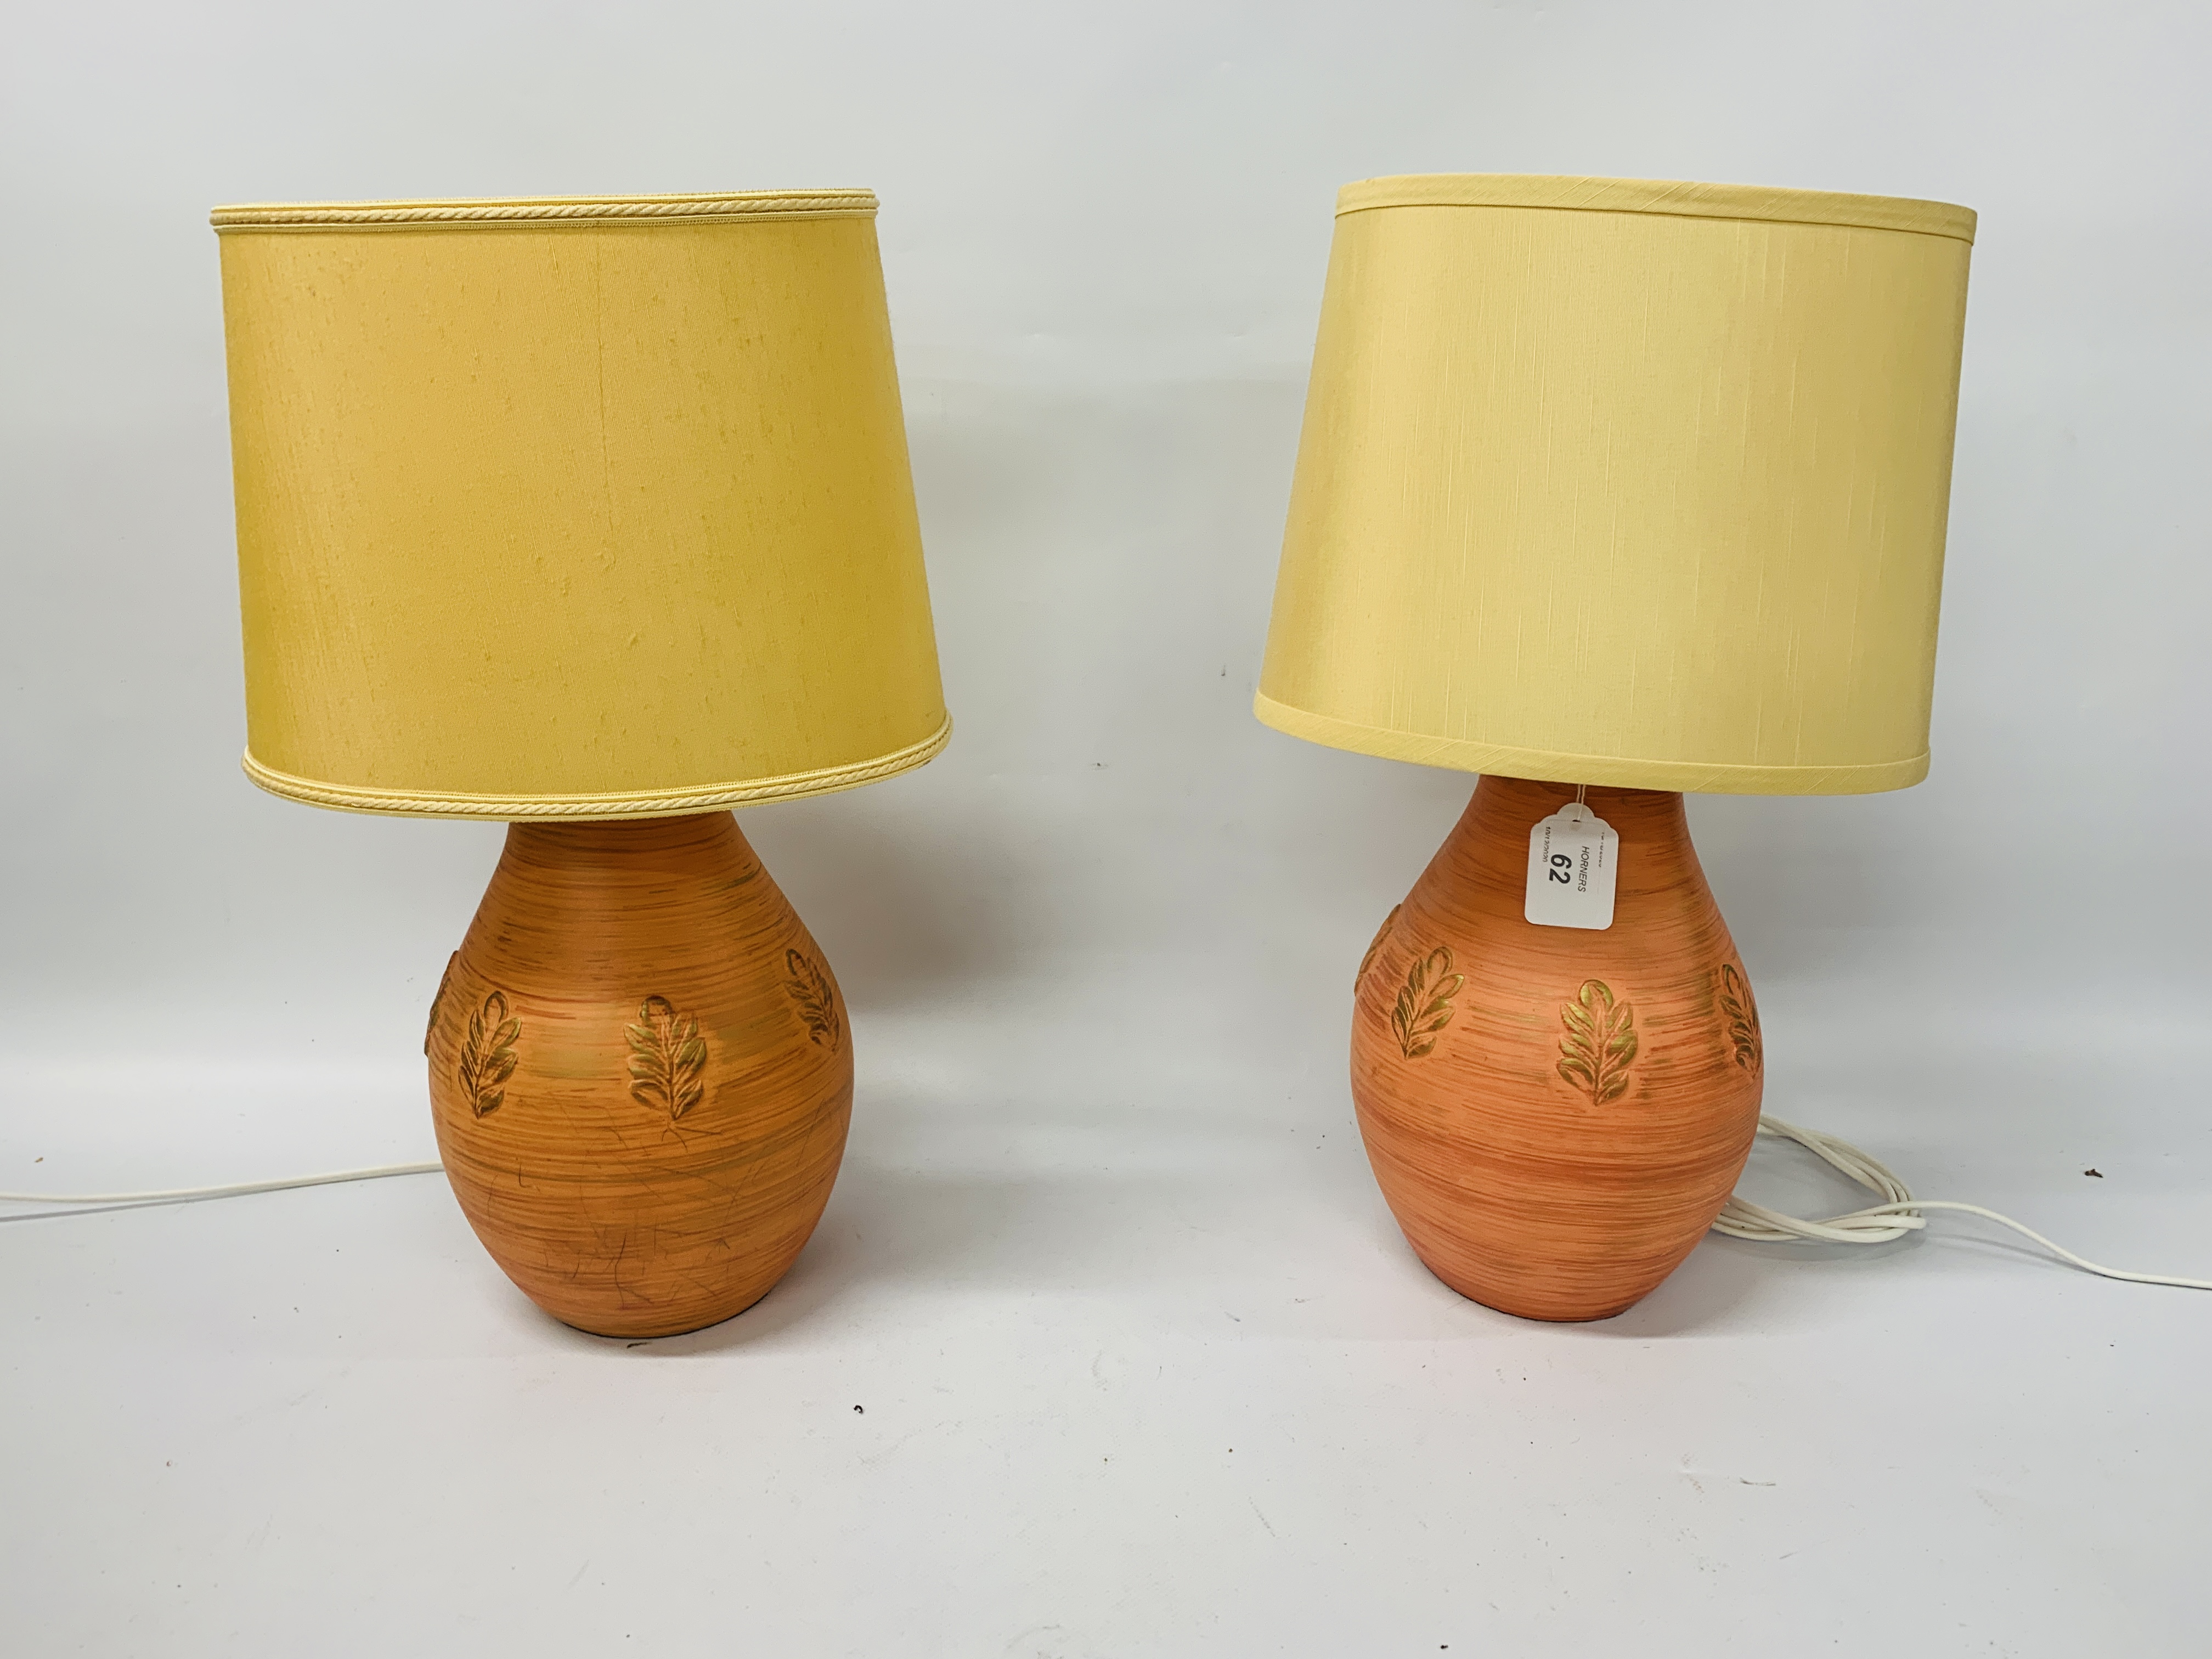 A PAIR OF "NATURAL WORLD" POTTERY TABLE LAMPS WITH SHADES - SOLD AS SEEN